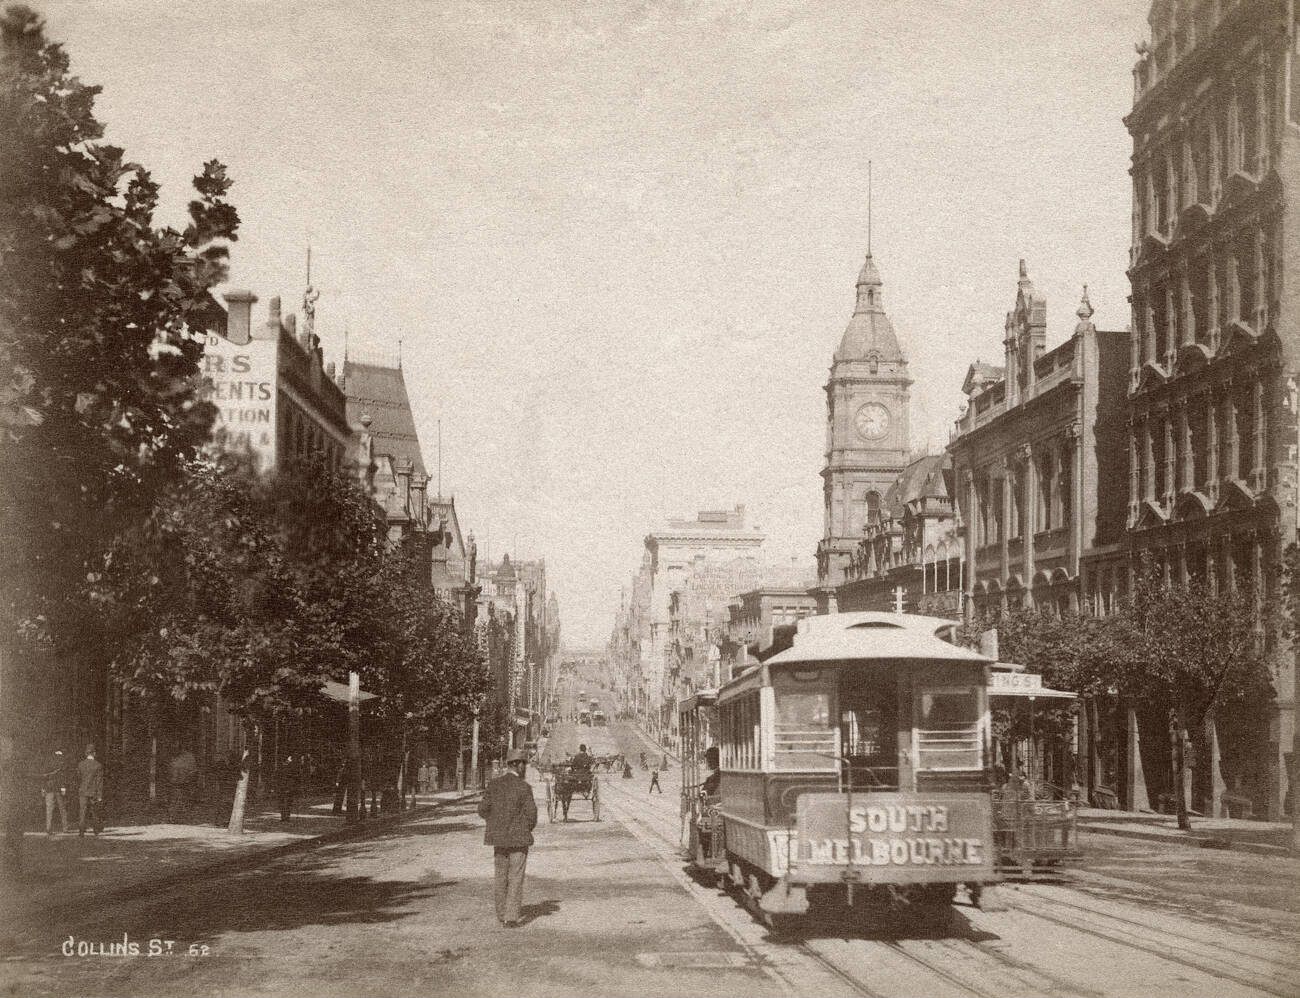 View of Collins Street from Russell Street in South Melbourne, 1885